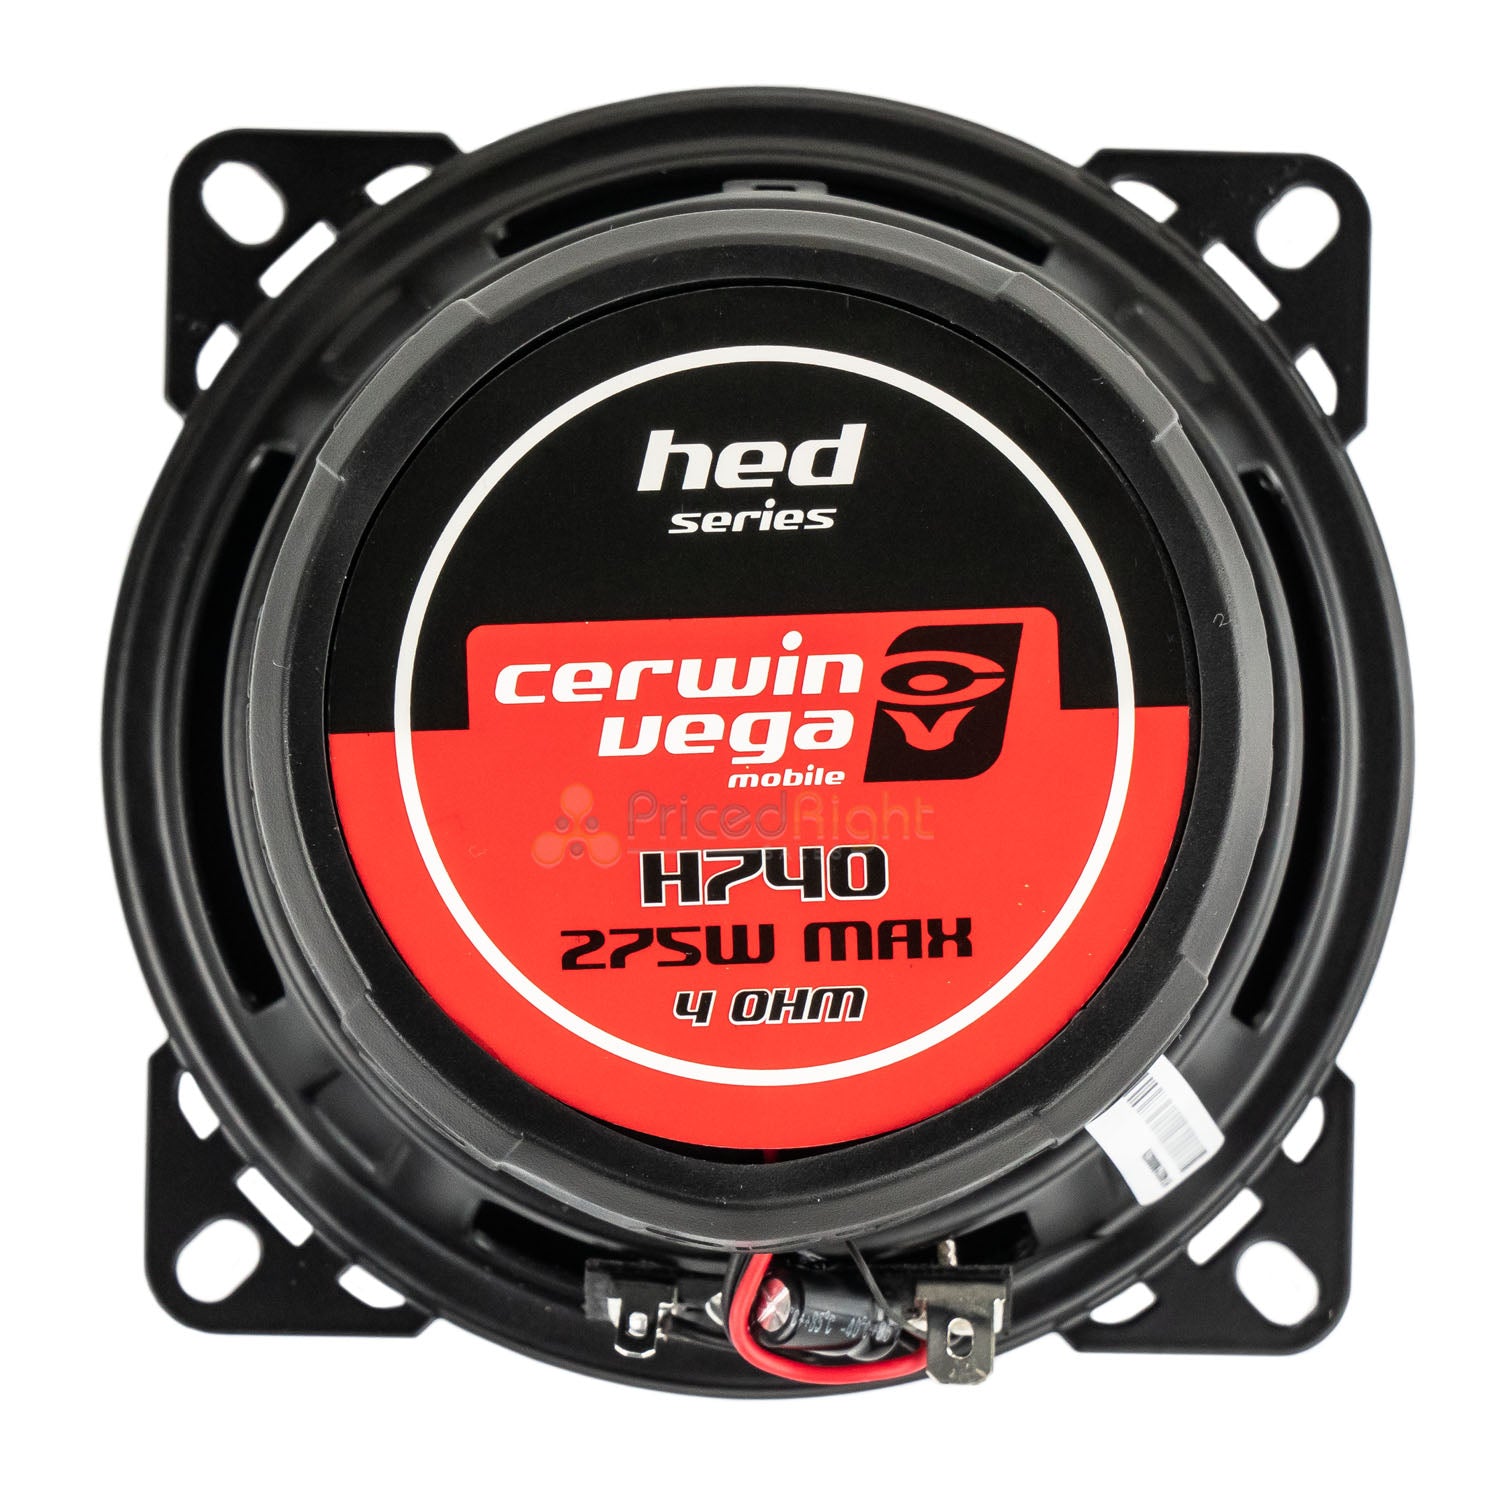 Cerwin Vega 4" 2 Way Coaxial Speakers Car Stereo Speakers HED Series 40W RMS